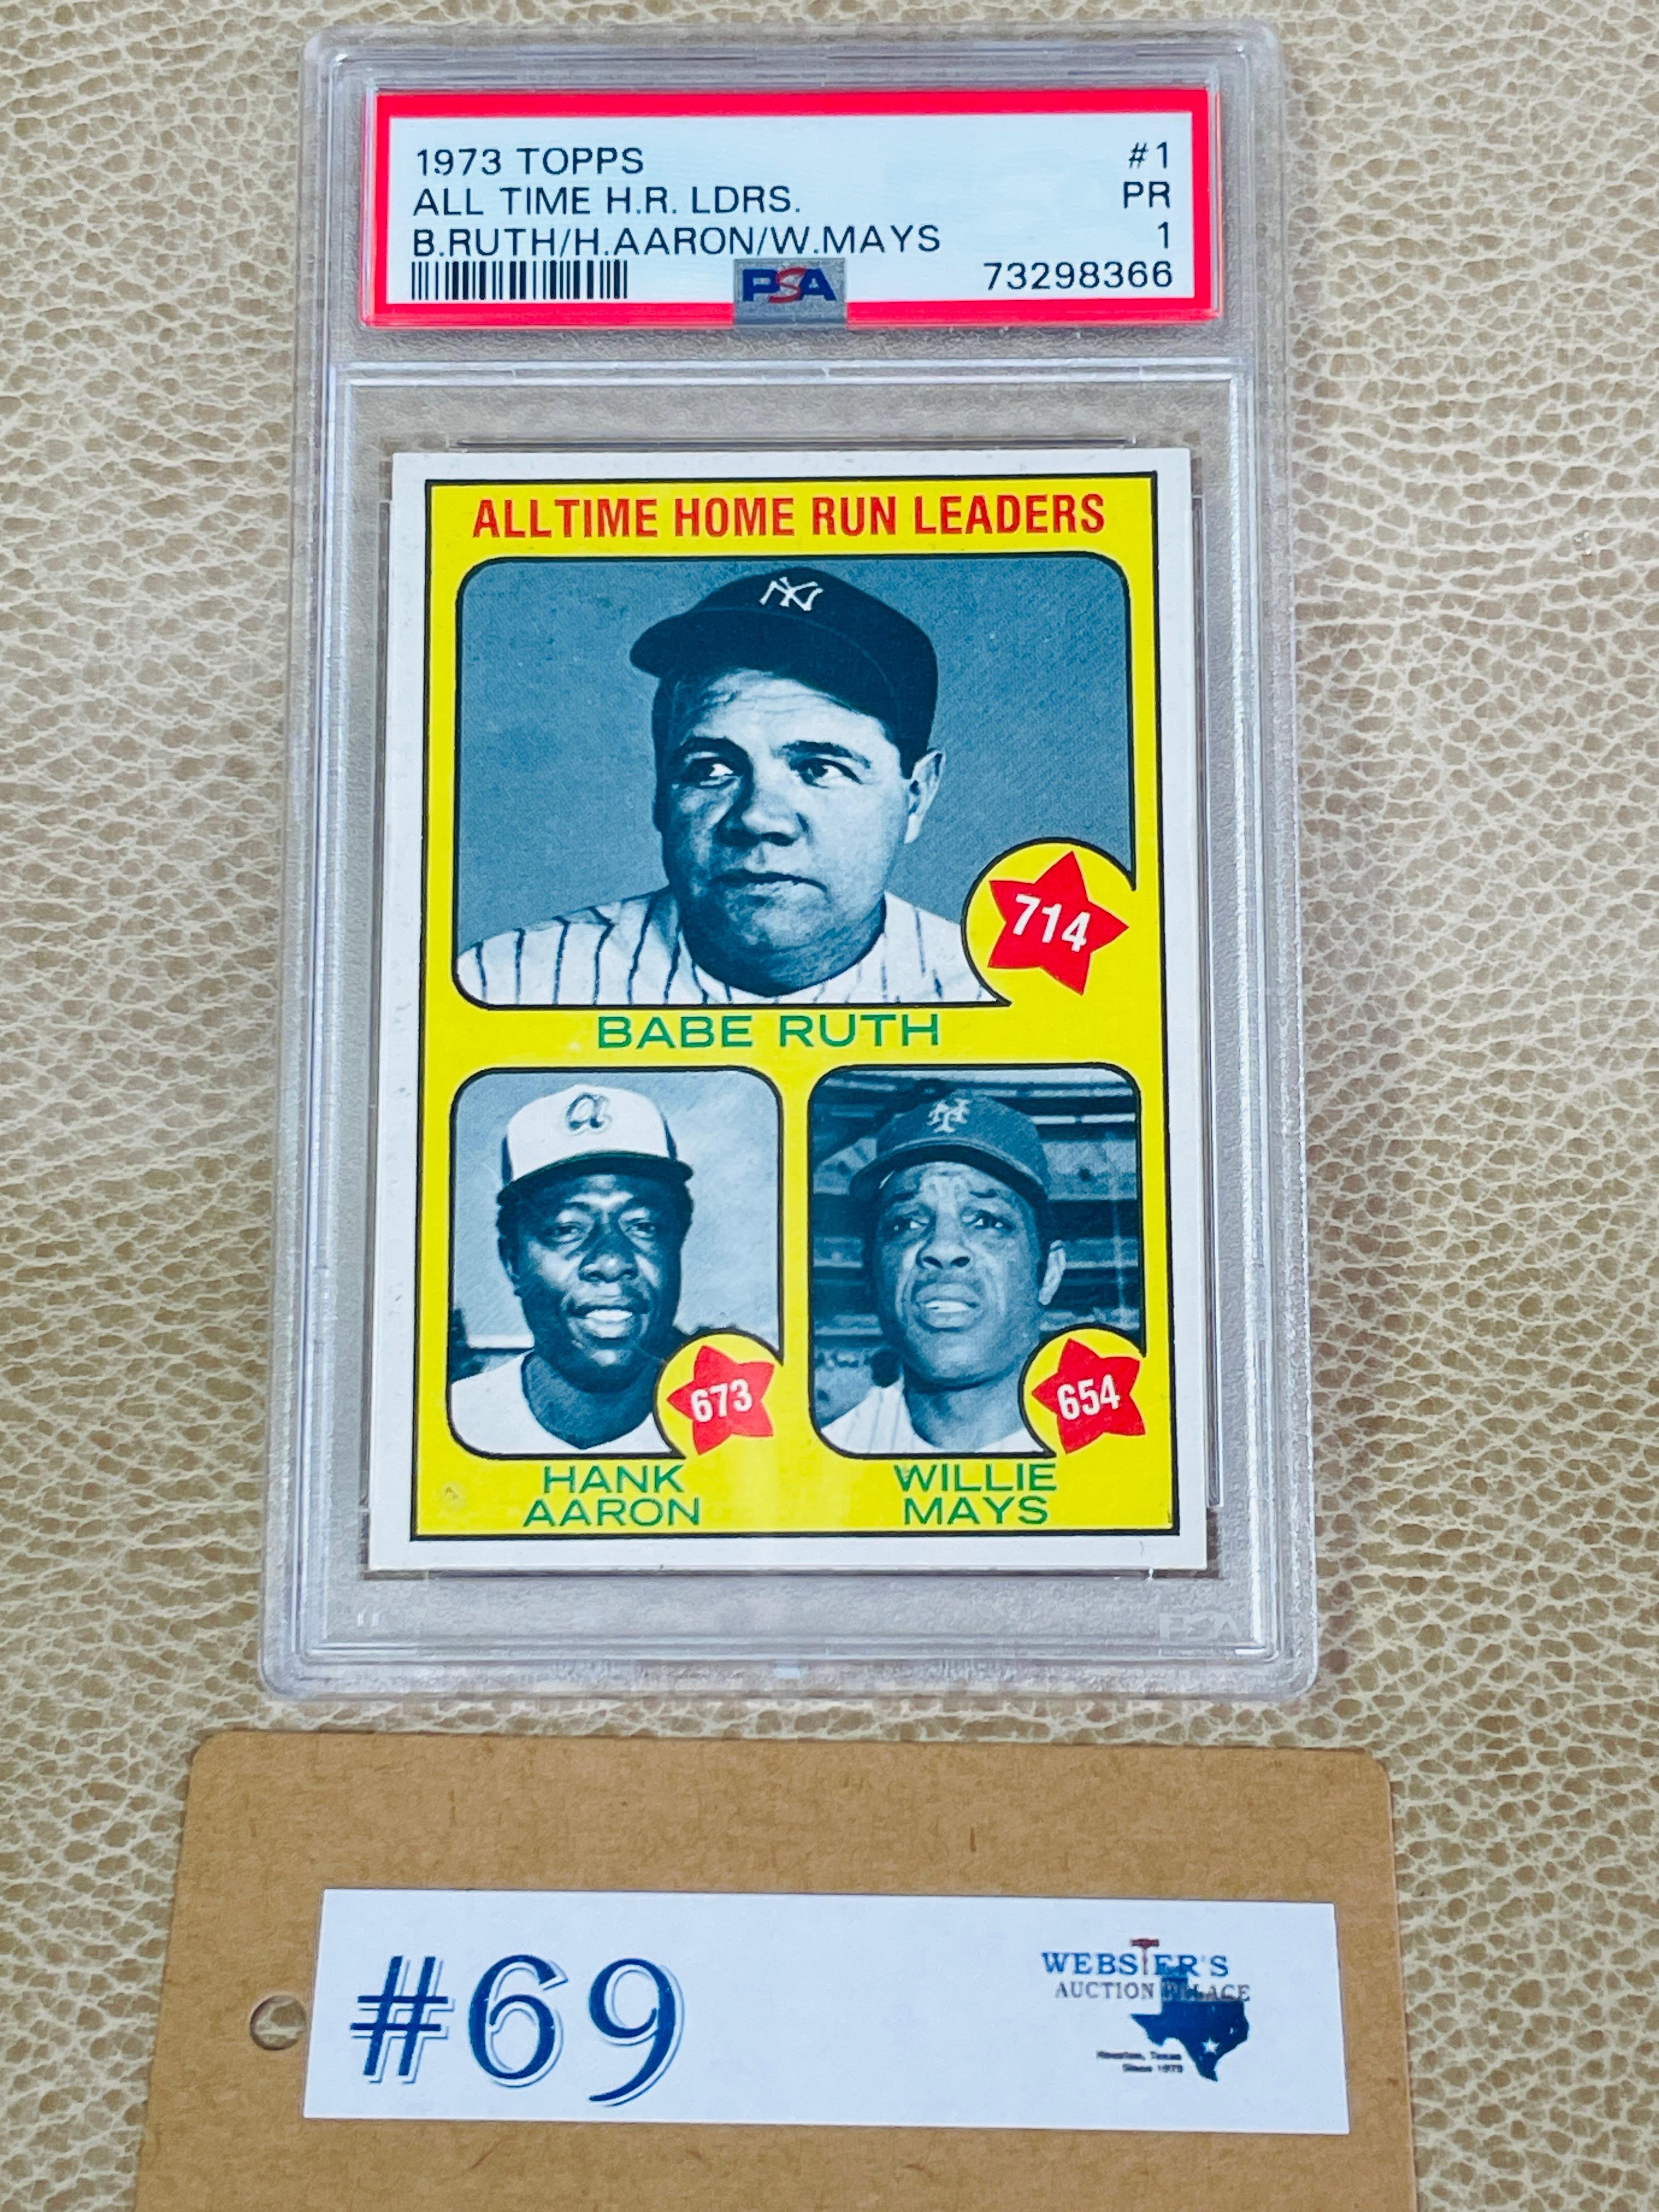 5PC OLD AND GRADED BASEBALL CARDS